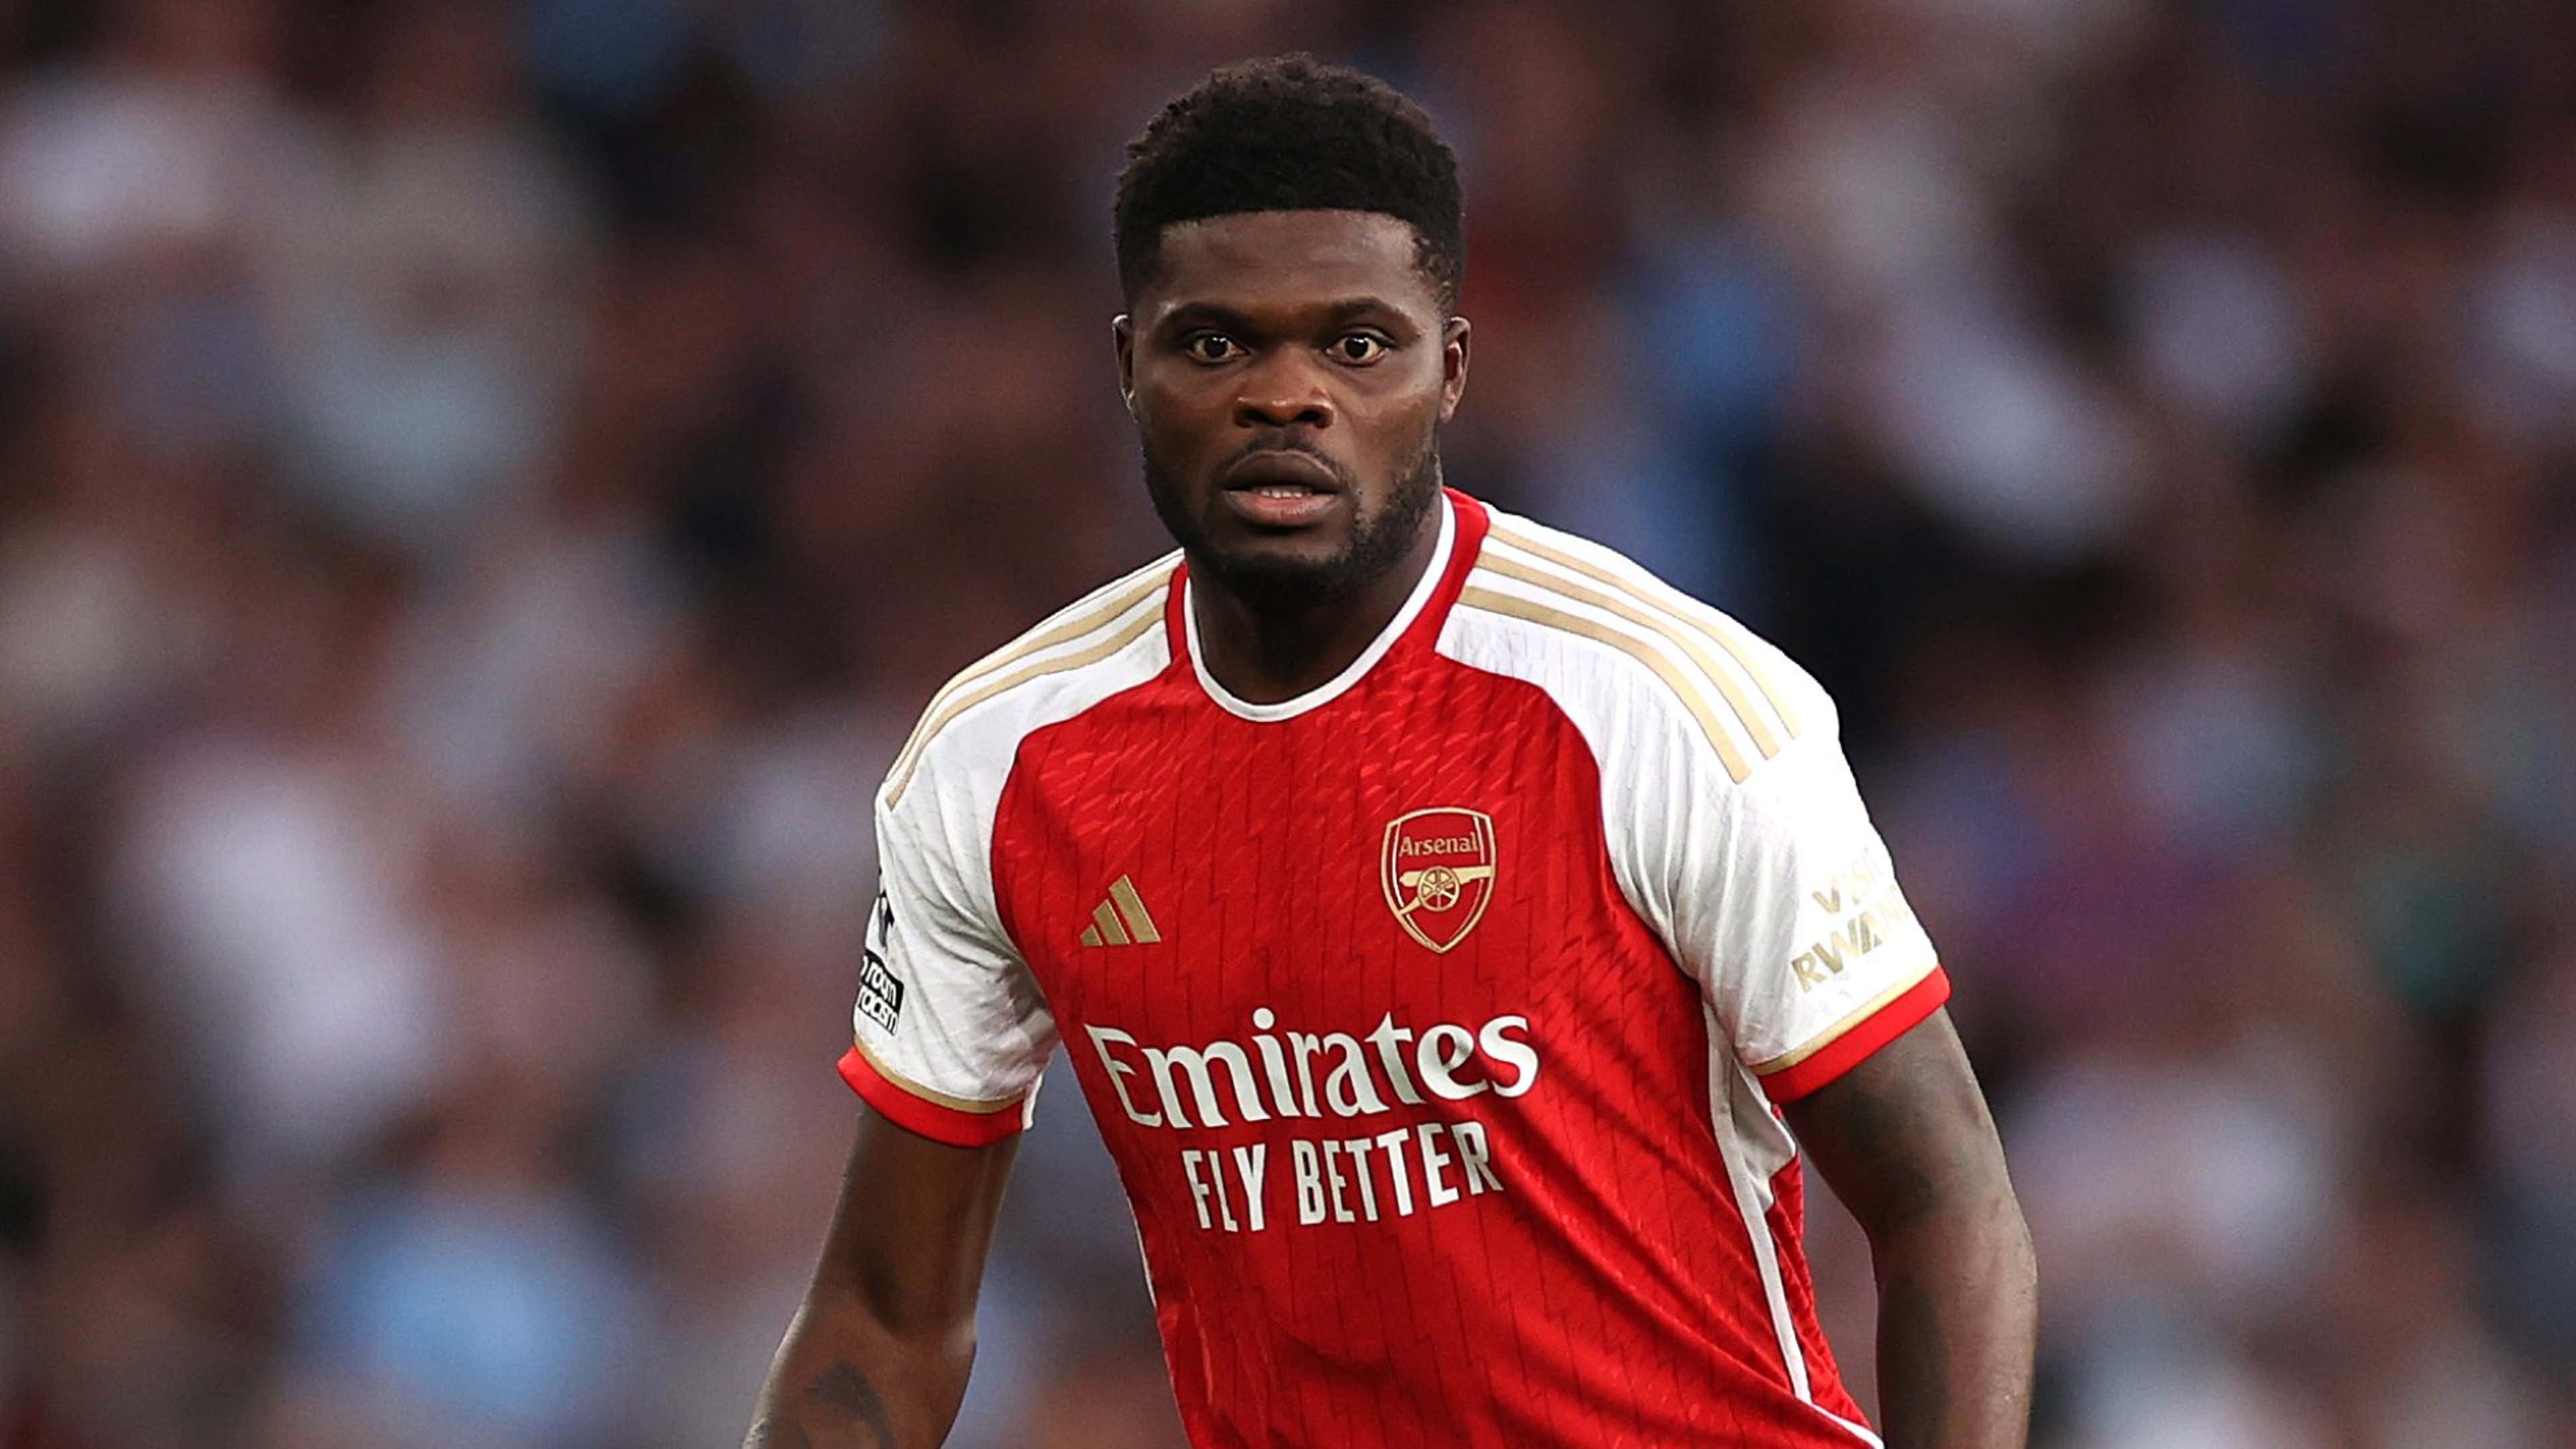 Thomas Partey had enough of bench warming? Juventus interested in signing  Arsenal midfielder as Paul Pogba replacement | Goal.com